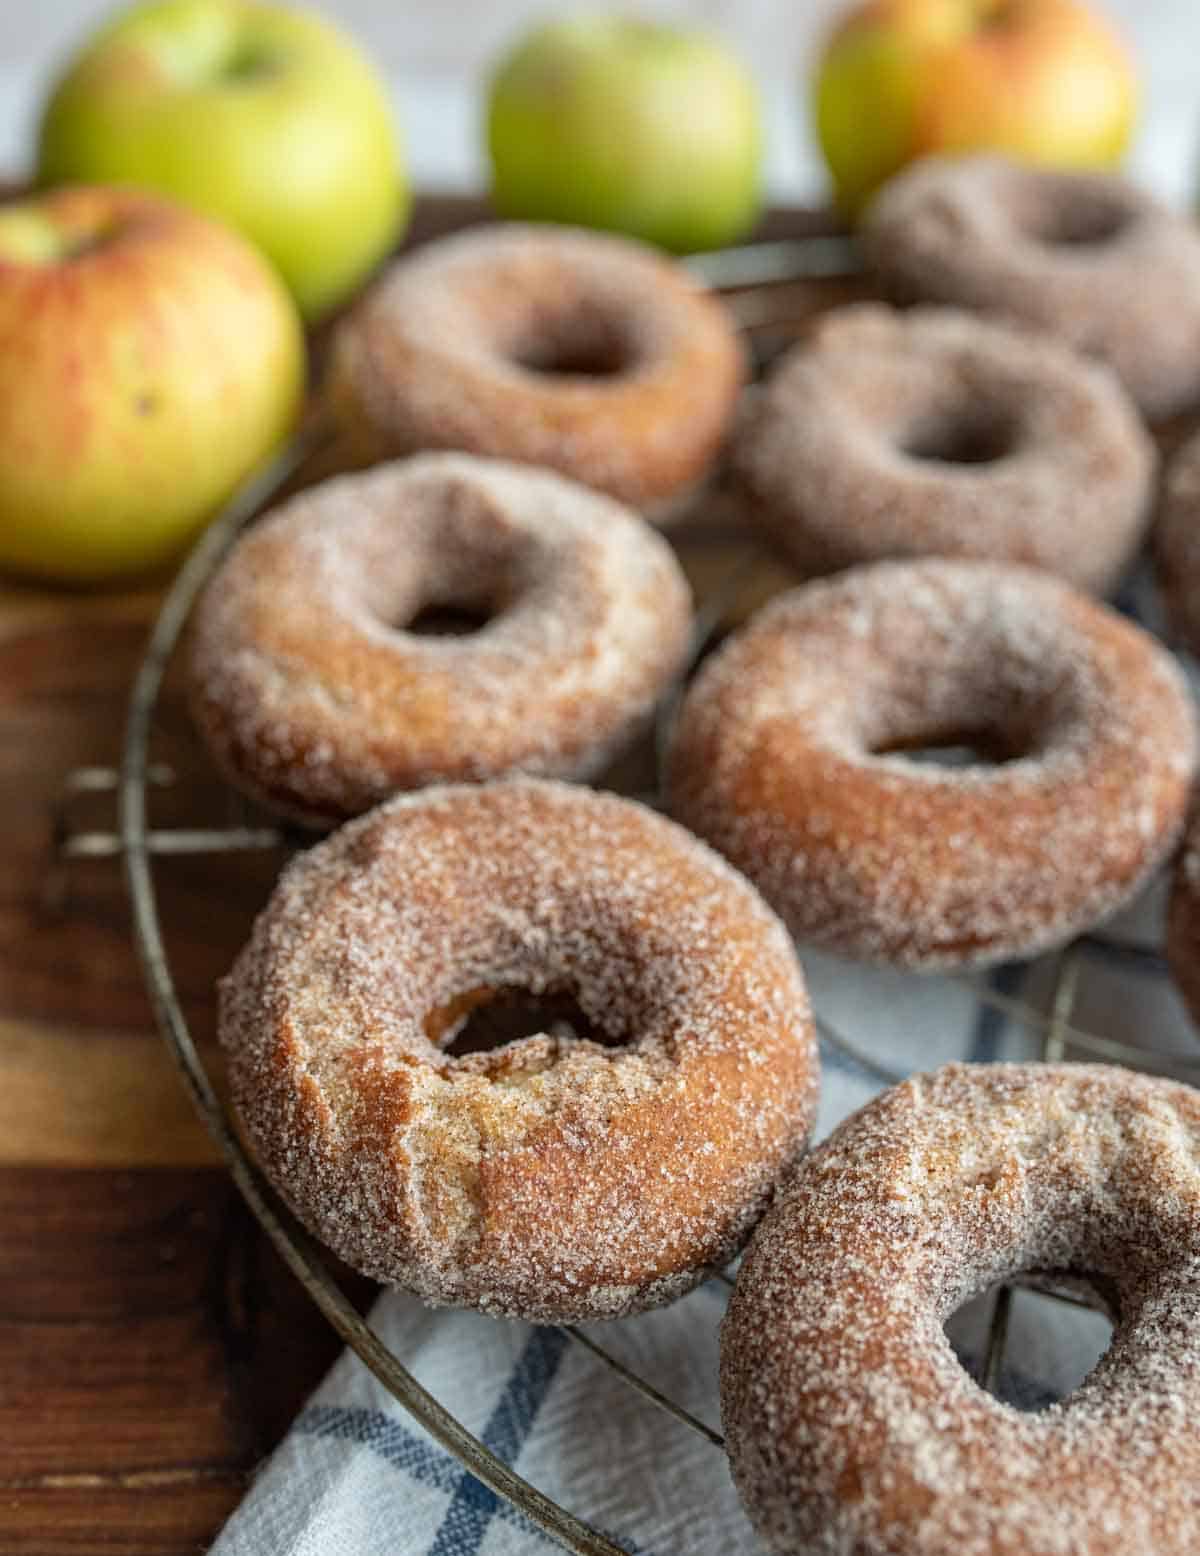 apple cider donuts and holes dusted with sugar on a cooling rack